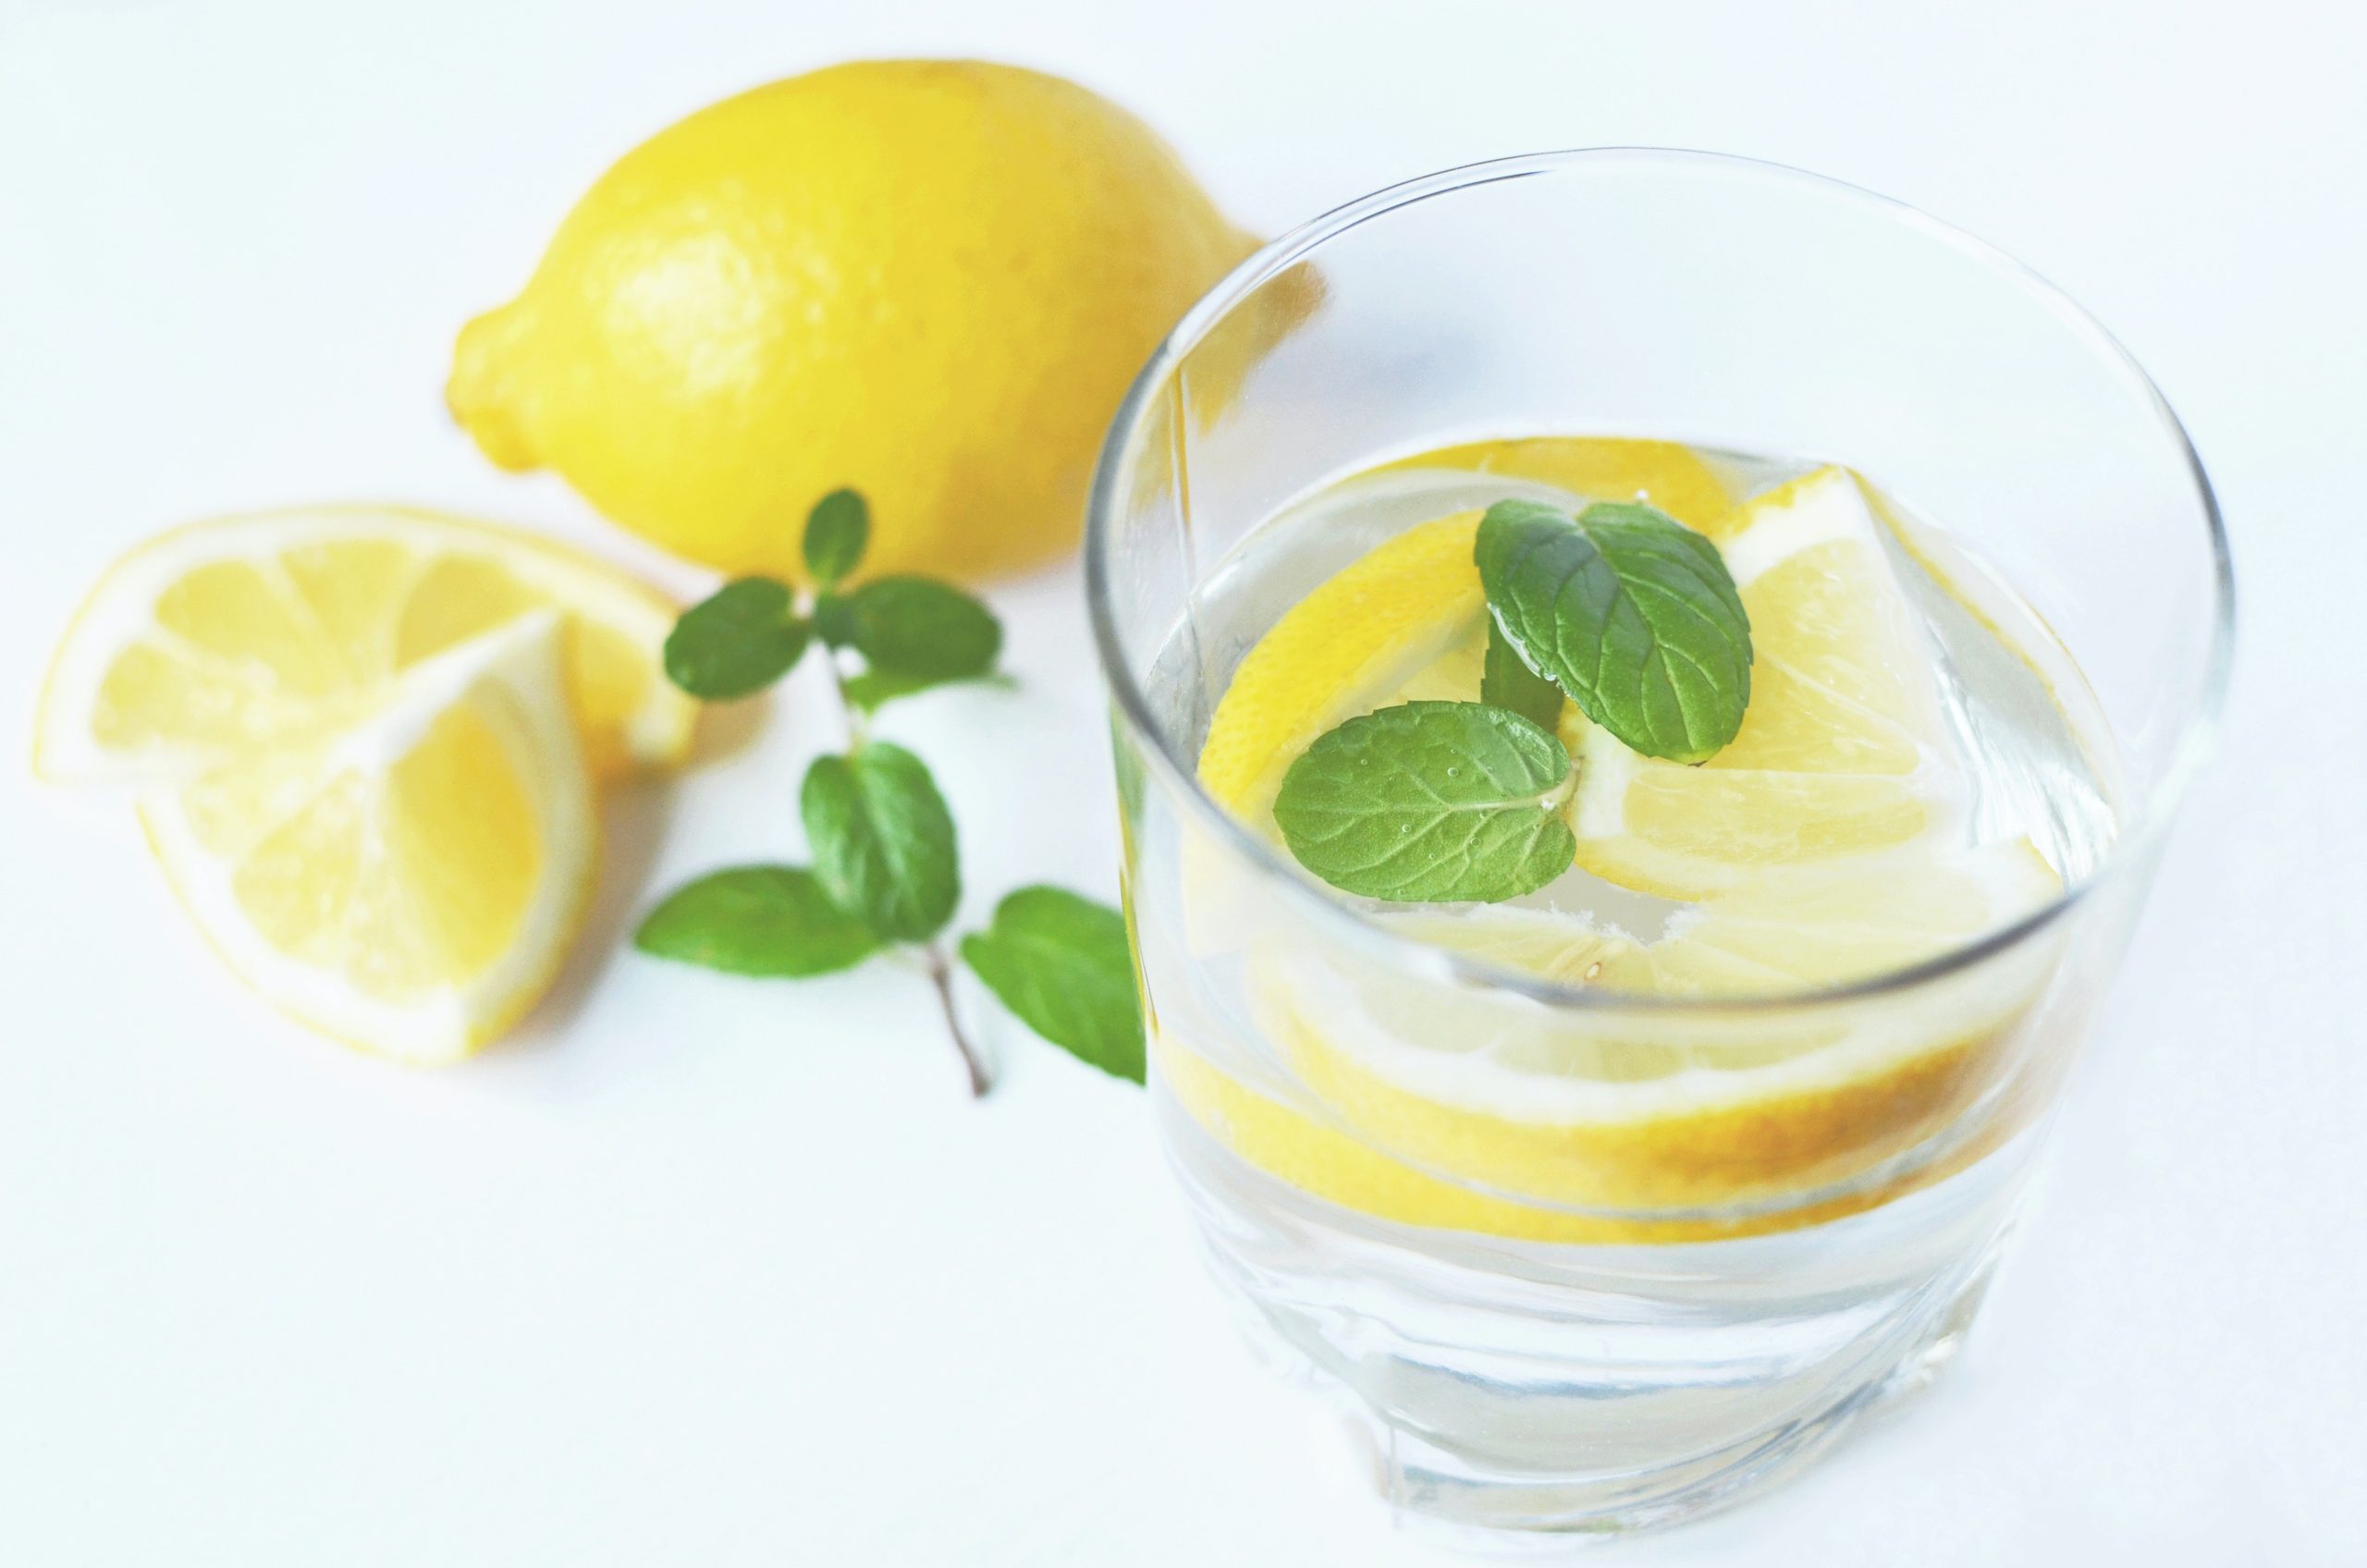 Why do people drink warm water with lemon juice?